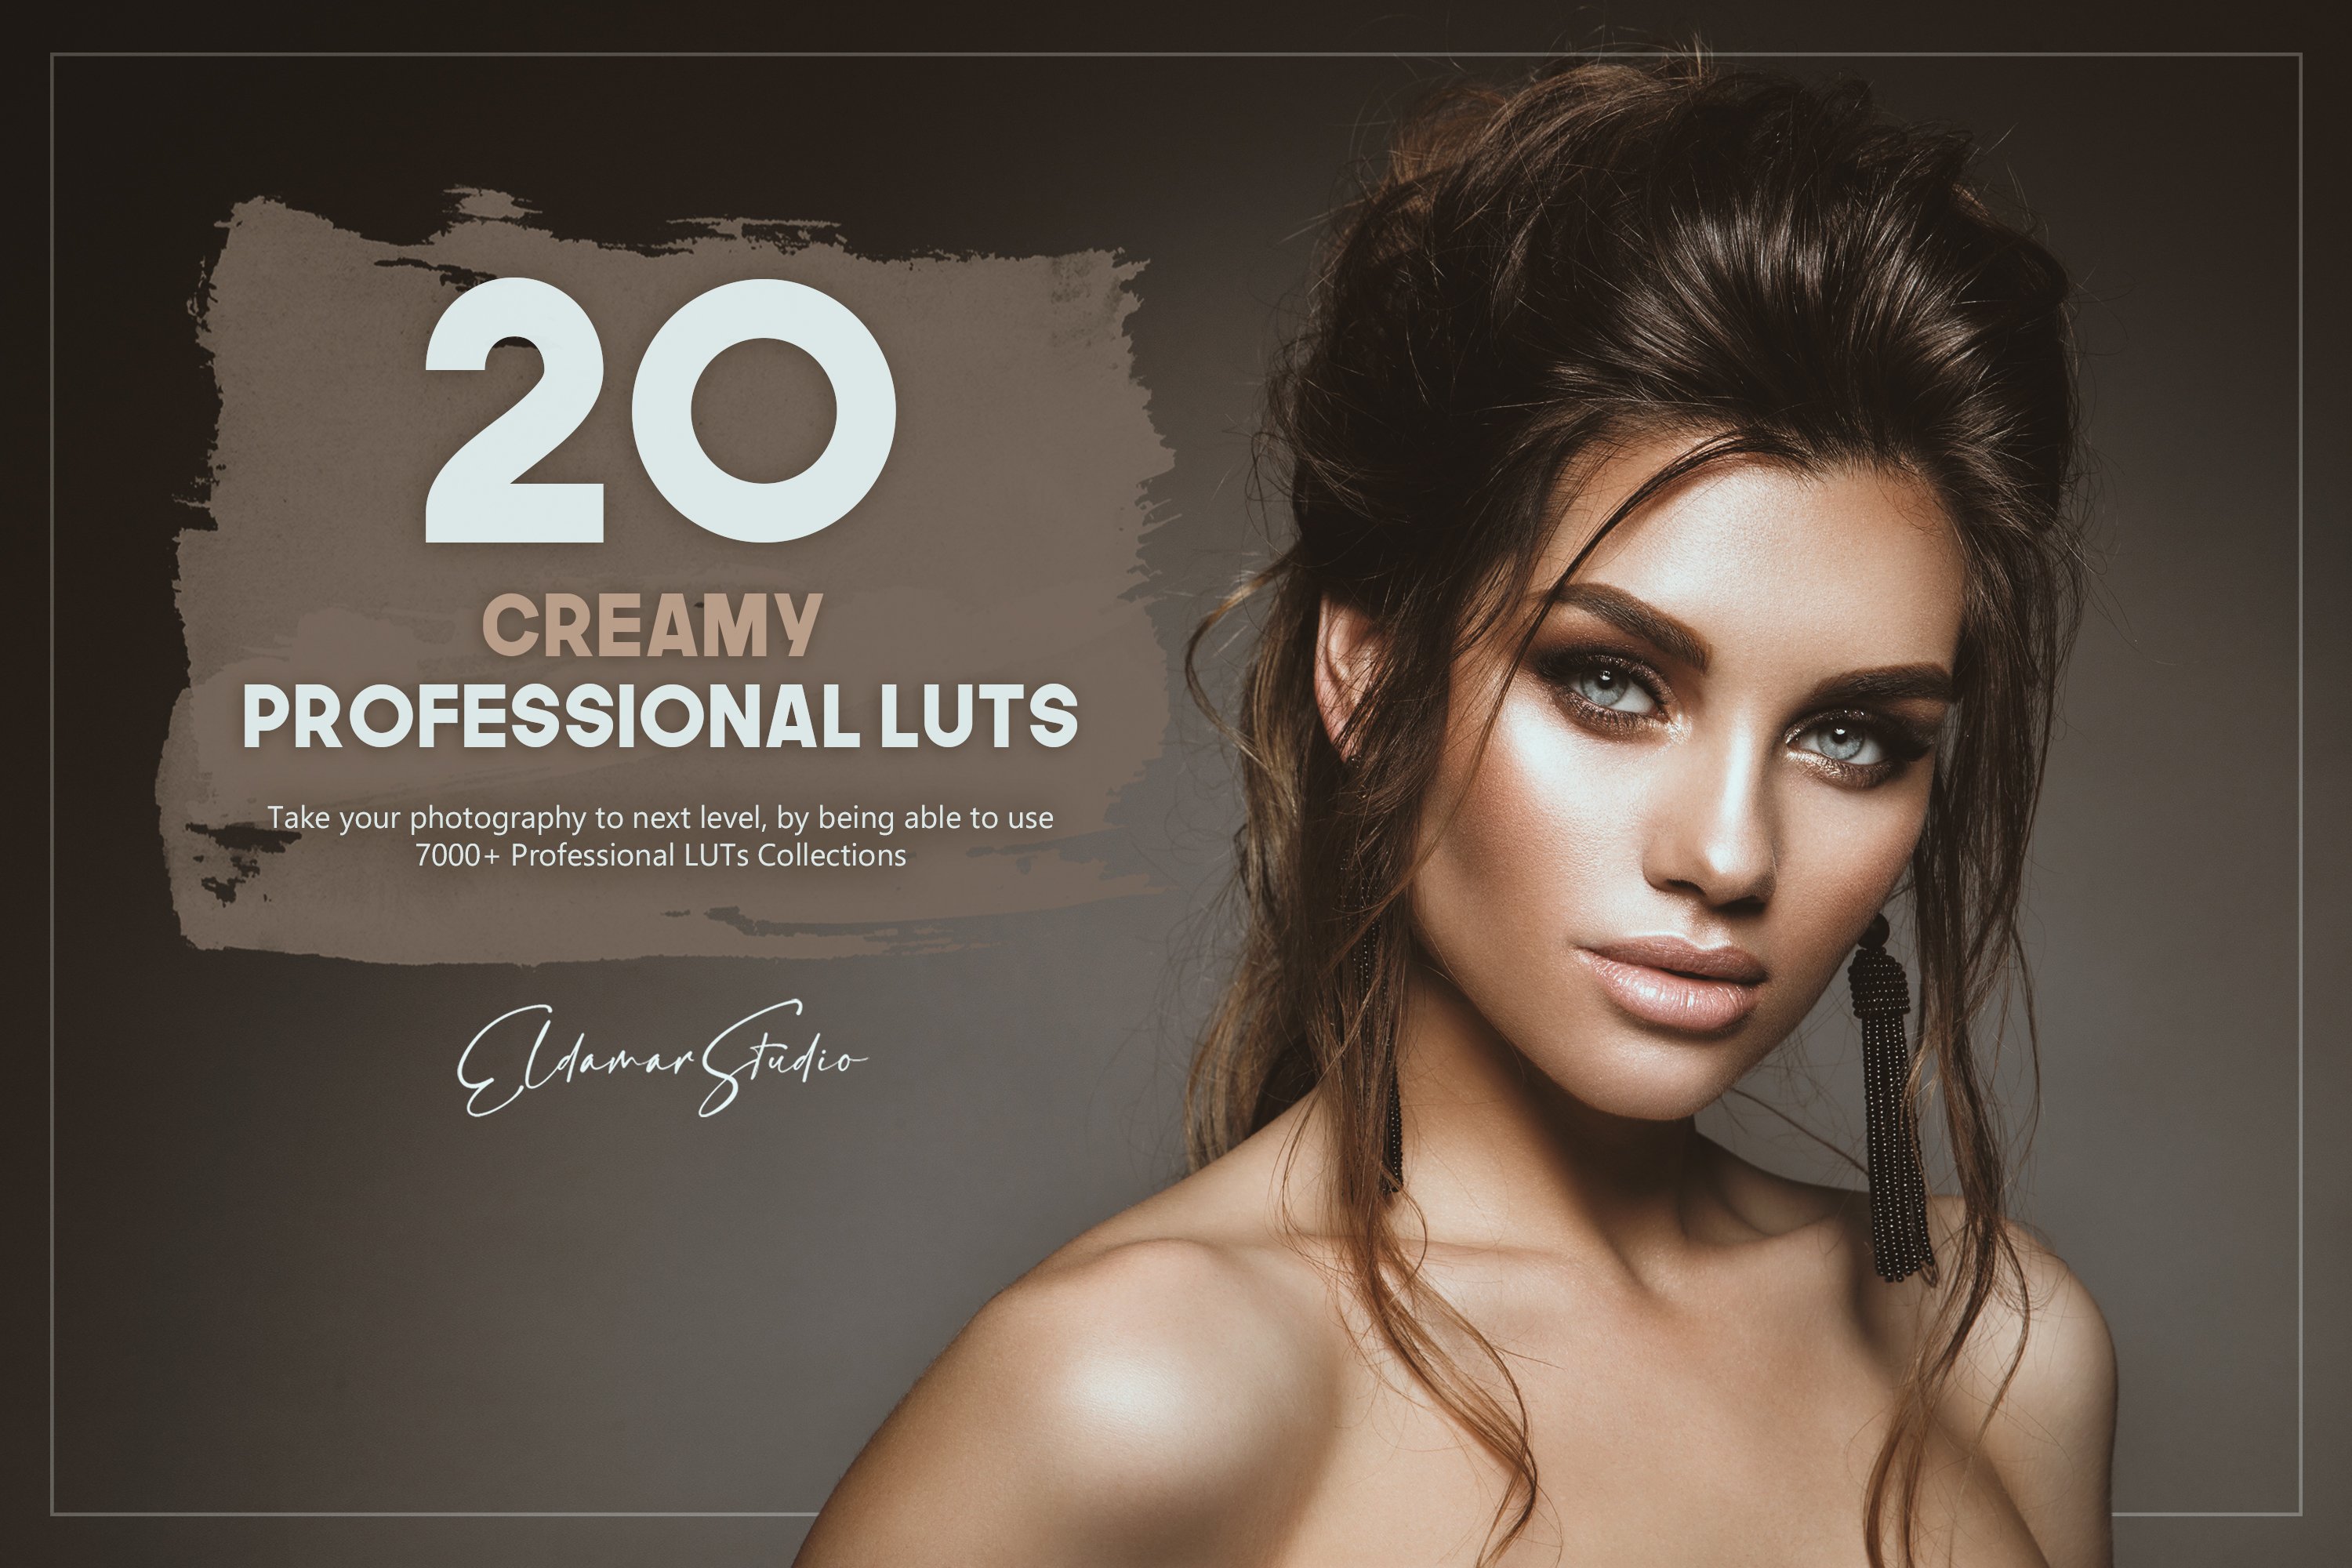 20 Creamy LUTs Packcover image.